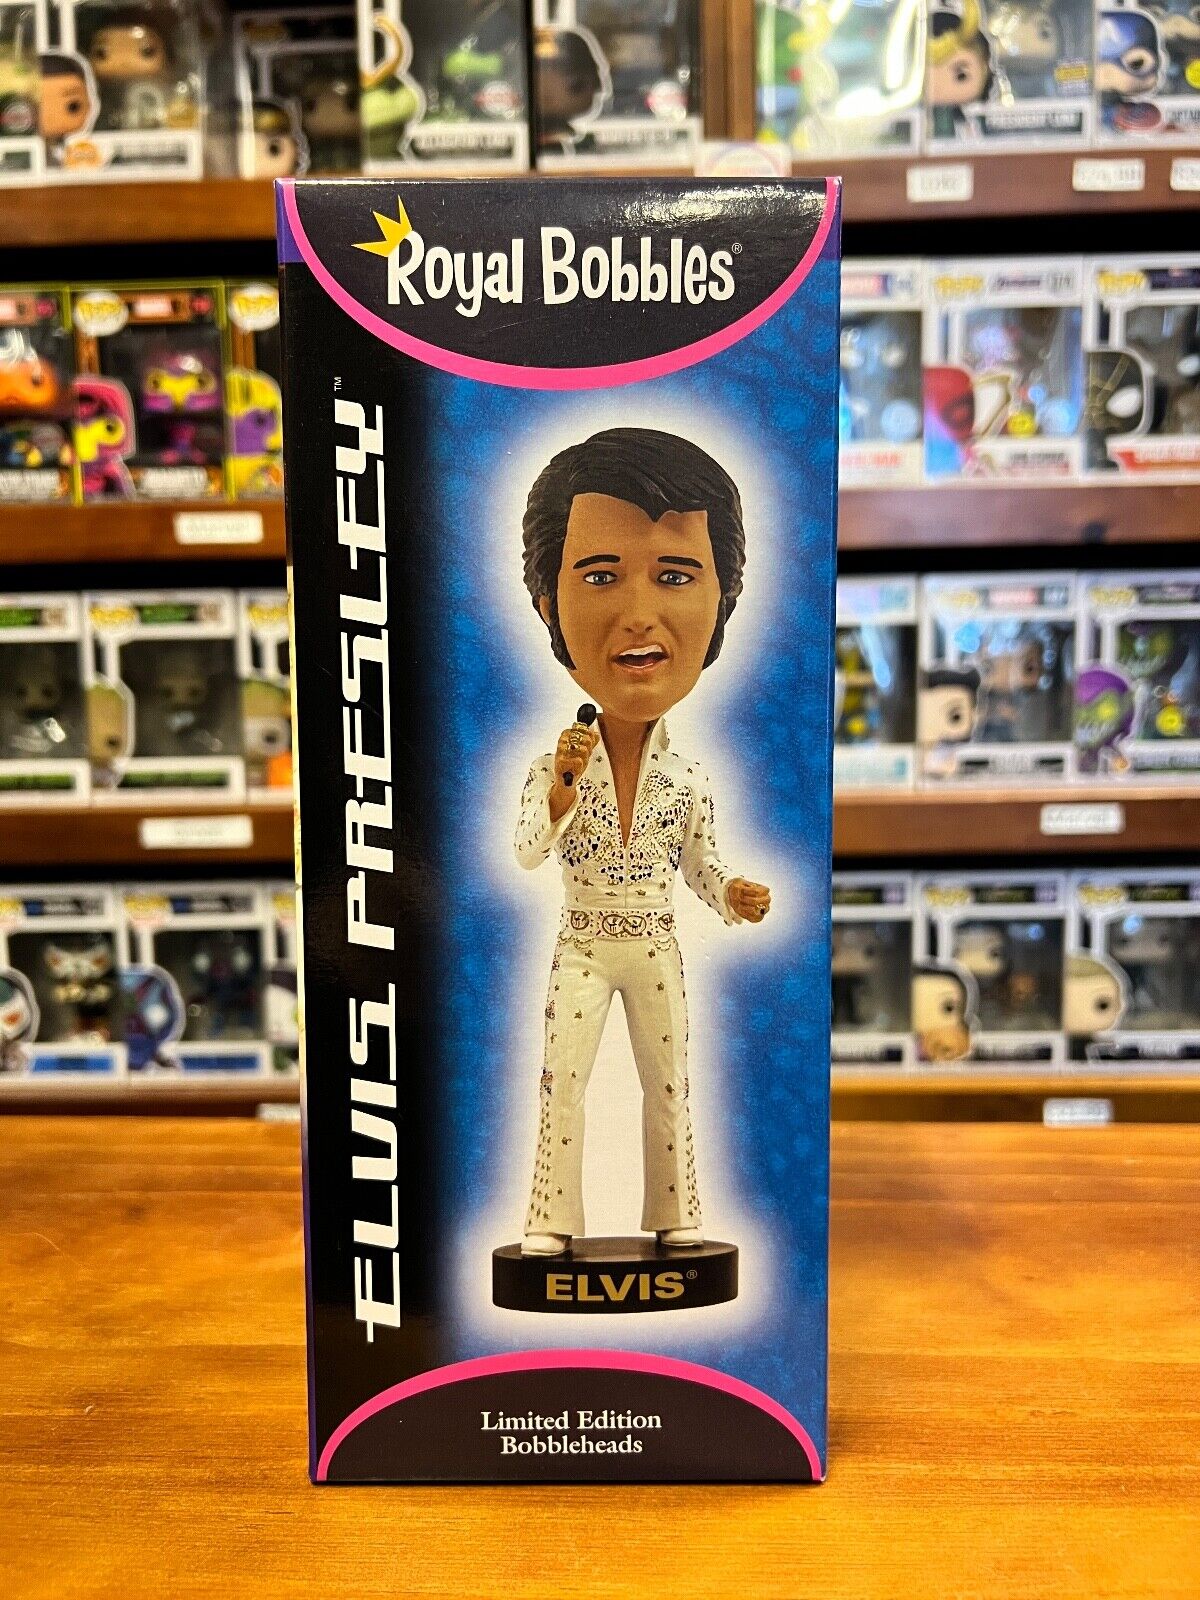 Elvis Presley “Aloha from Hawaii” Limited Edition Royal Bobbles EXPERT PACKAGING